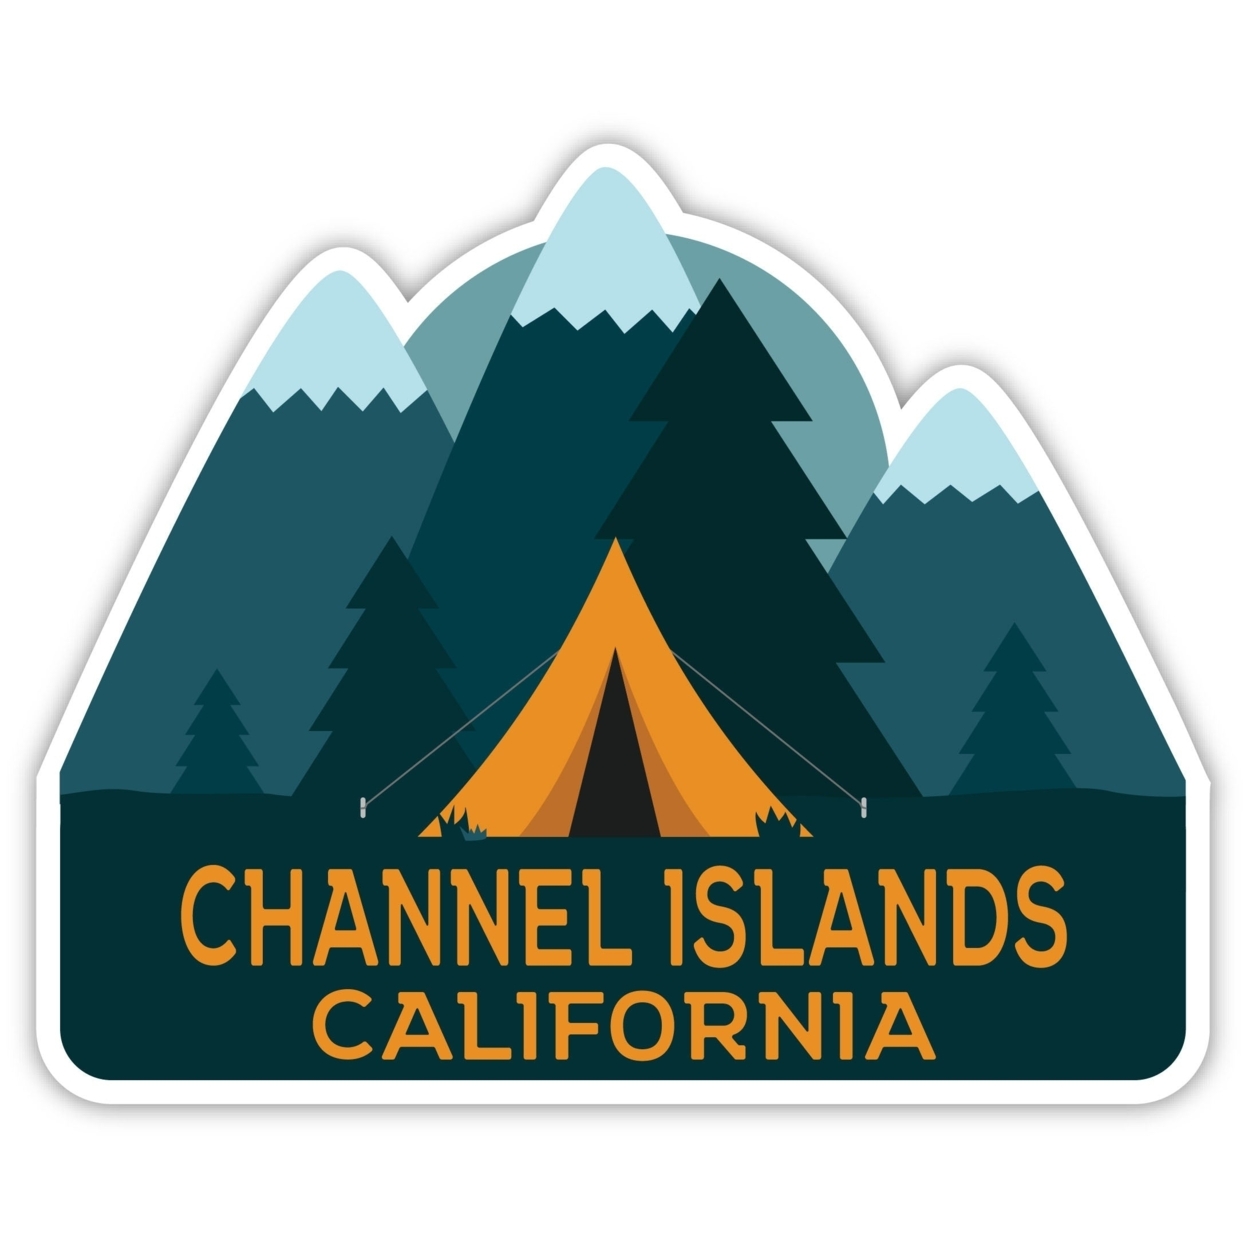 Channel Islands California Souvenir Decorative Stickers (Choose Theme And Size) - 4-Pack, 6-Inch, Tent